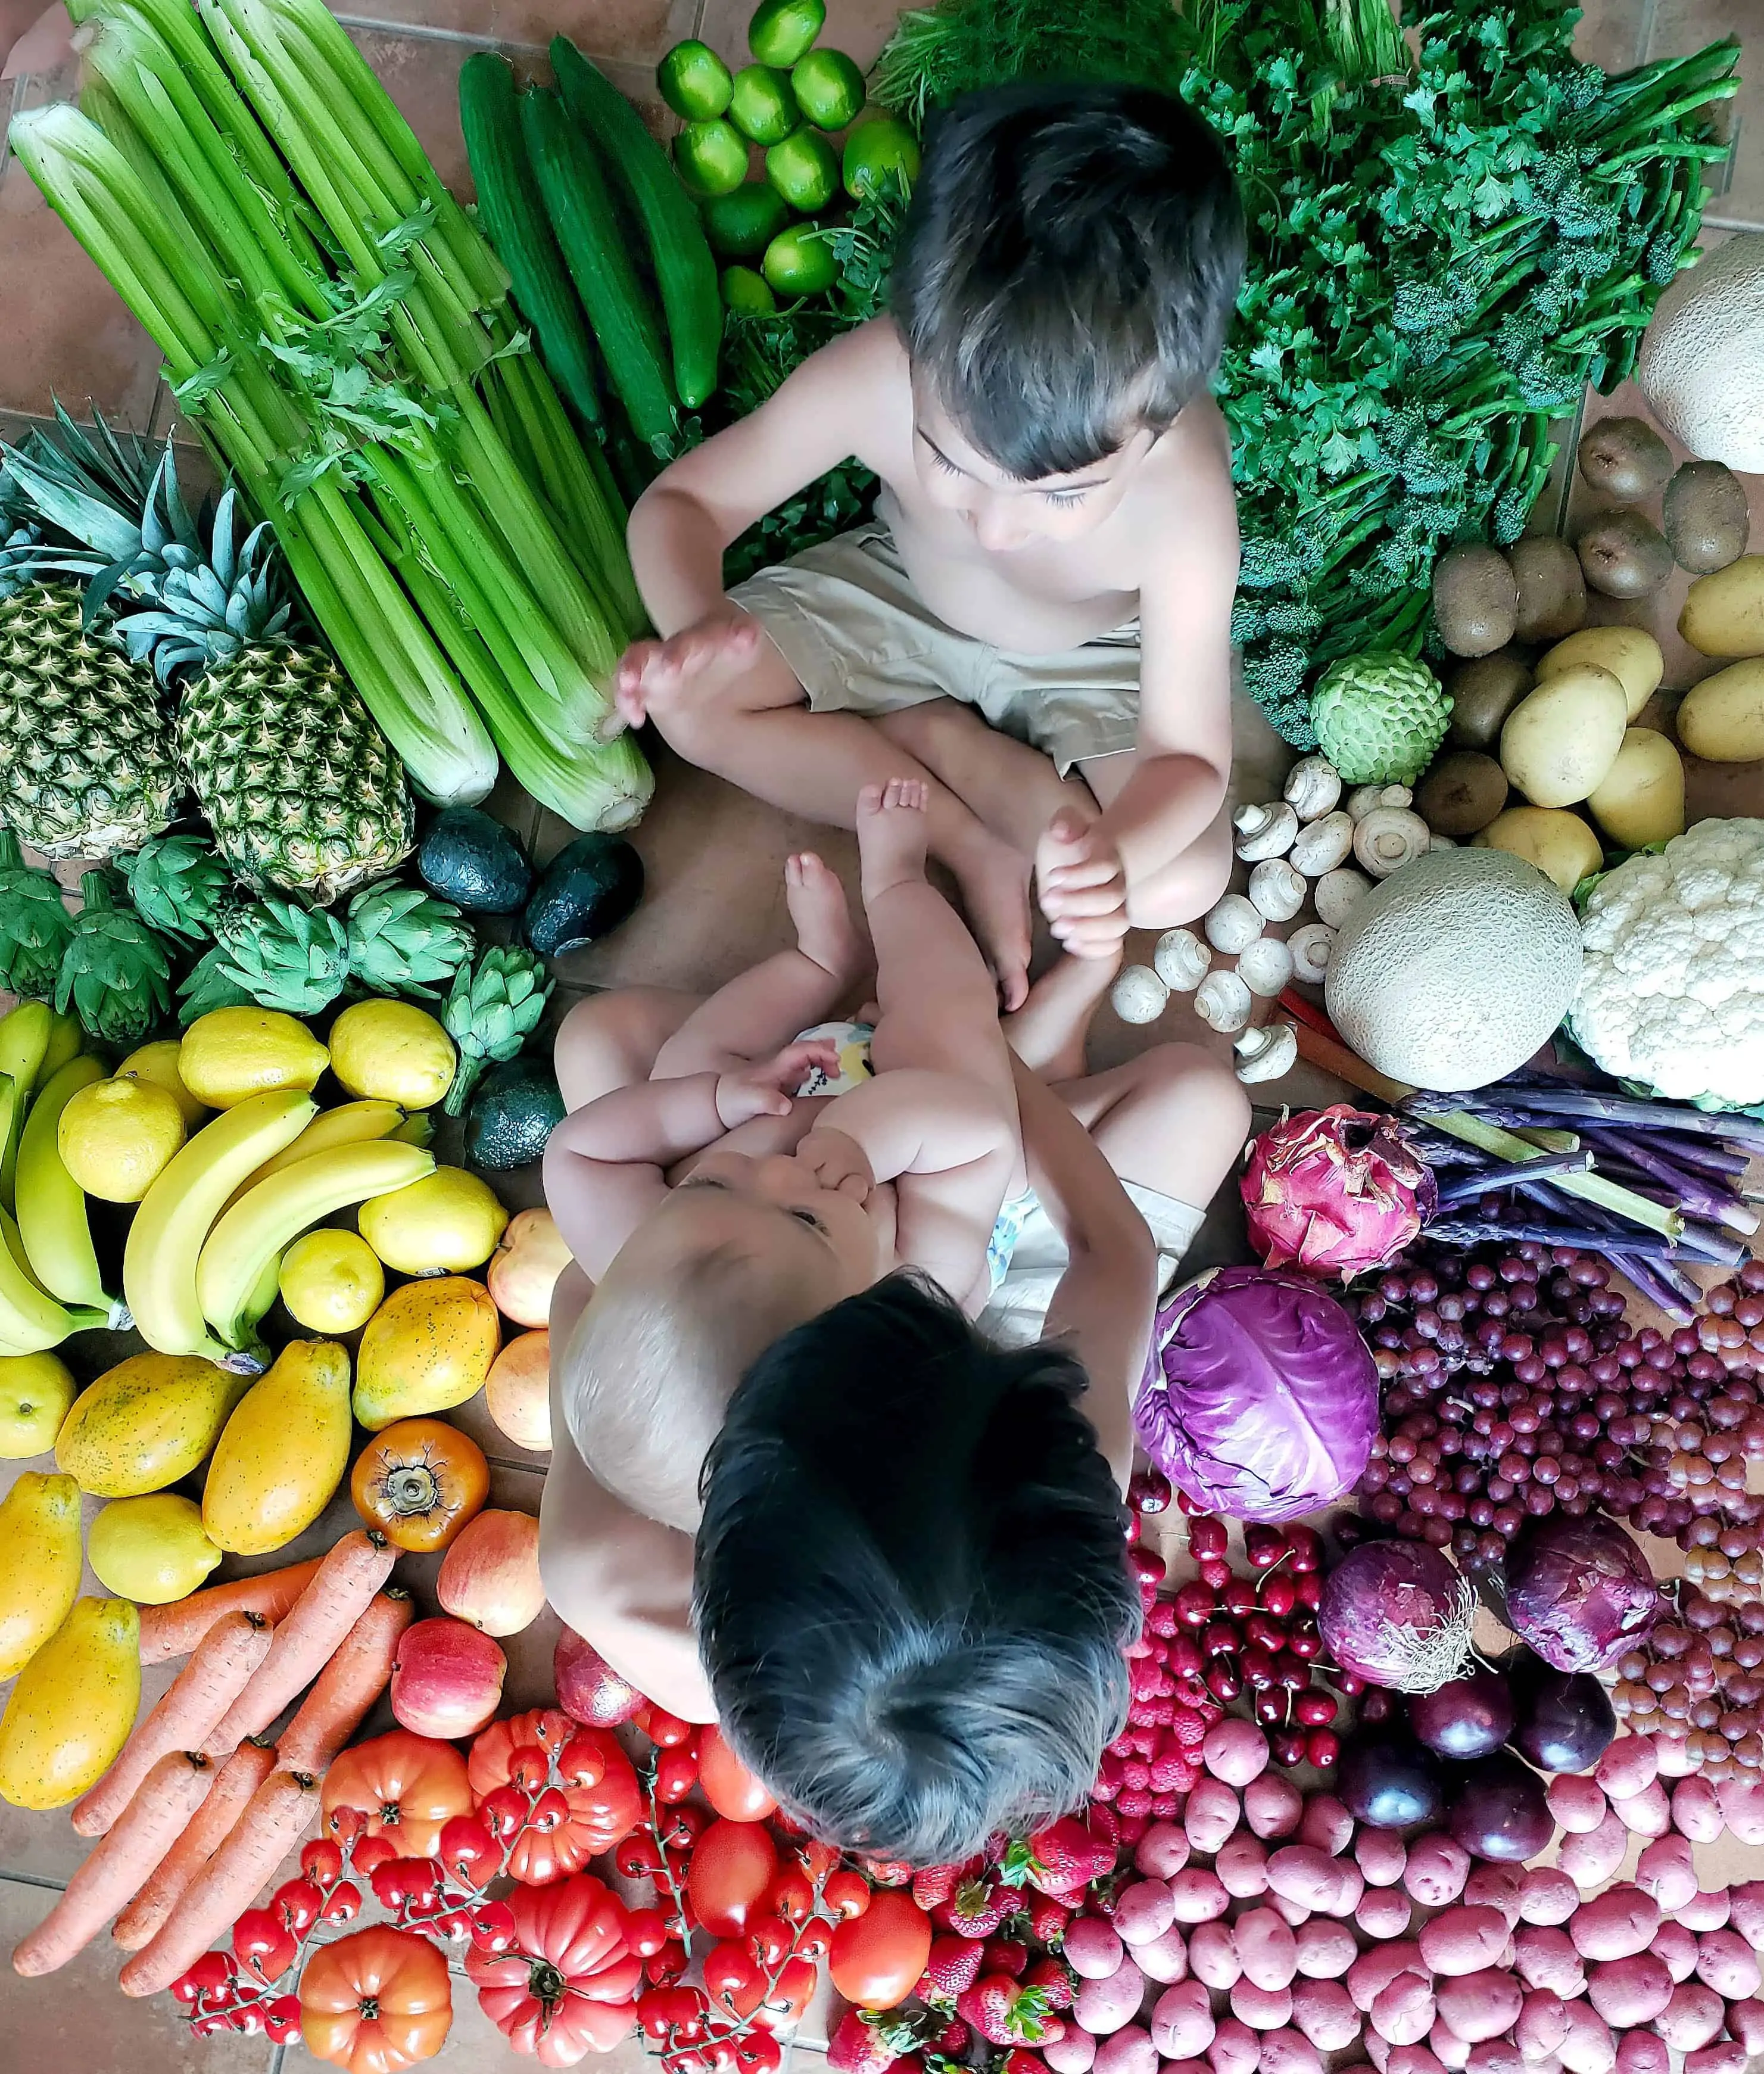 3 young kids sitting together sourounded by healthy raw whole foods. Image is for tips on how to deal with picky eaters.